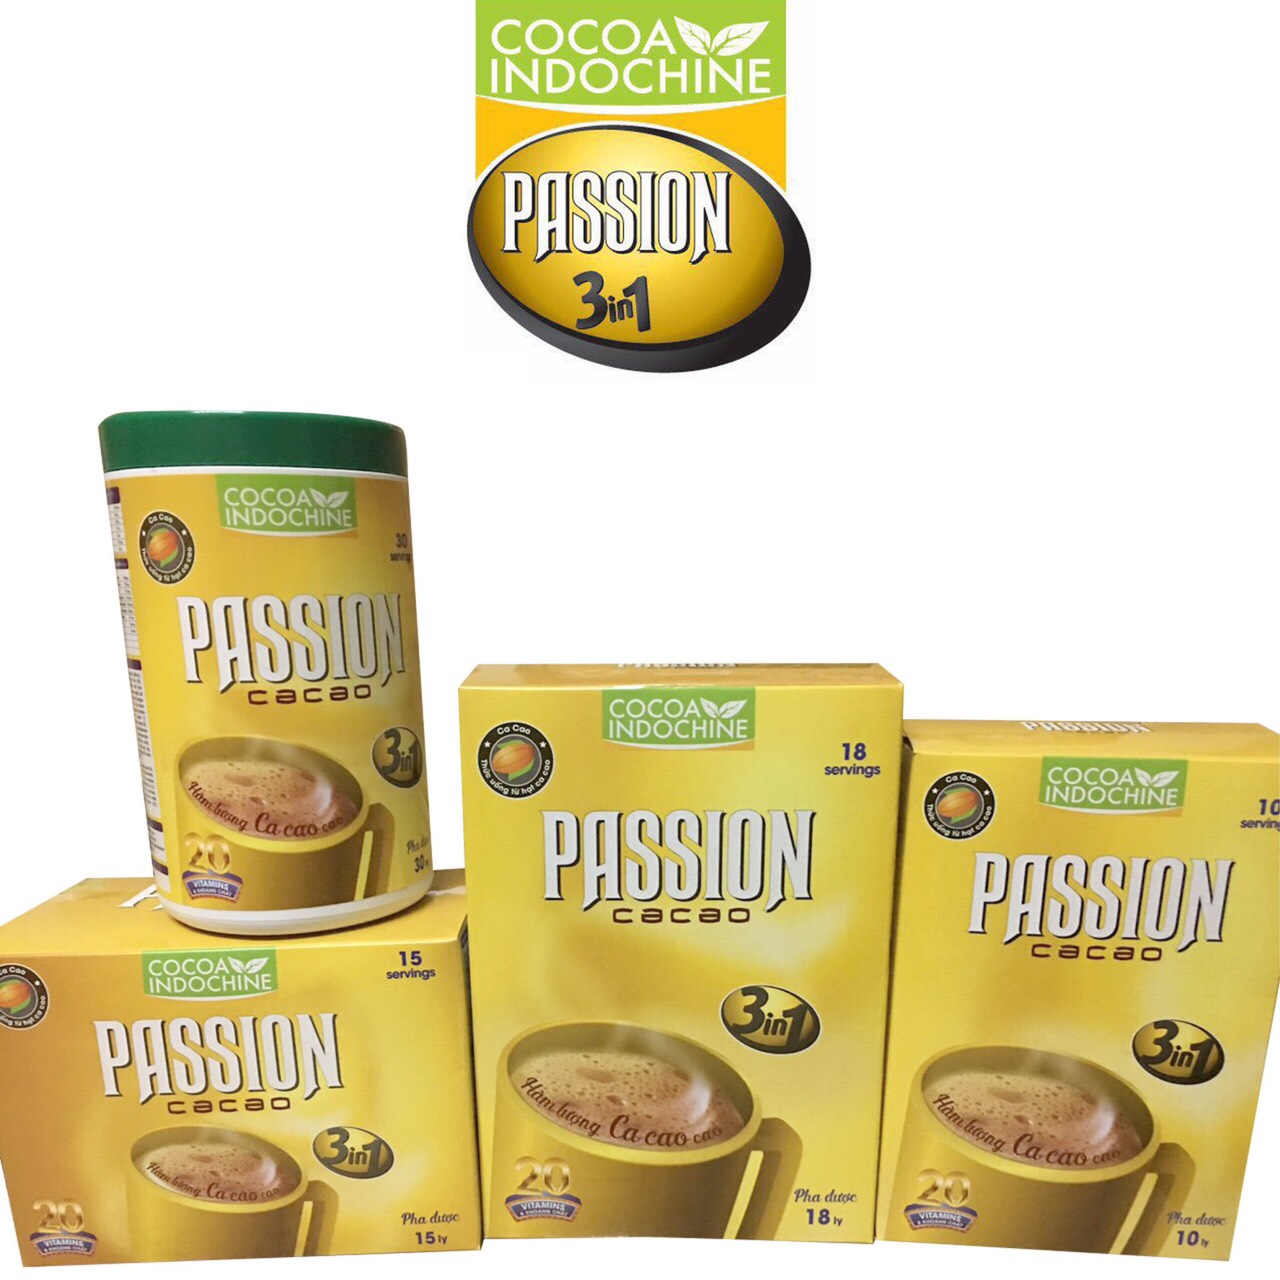 Bột Cacao Hòa Tan Passion 3 In 1 Cocoa Indochine (Hộp 15 Gói x 16g)